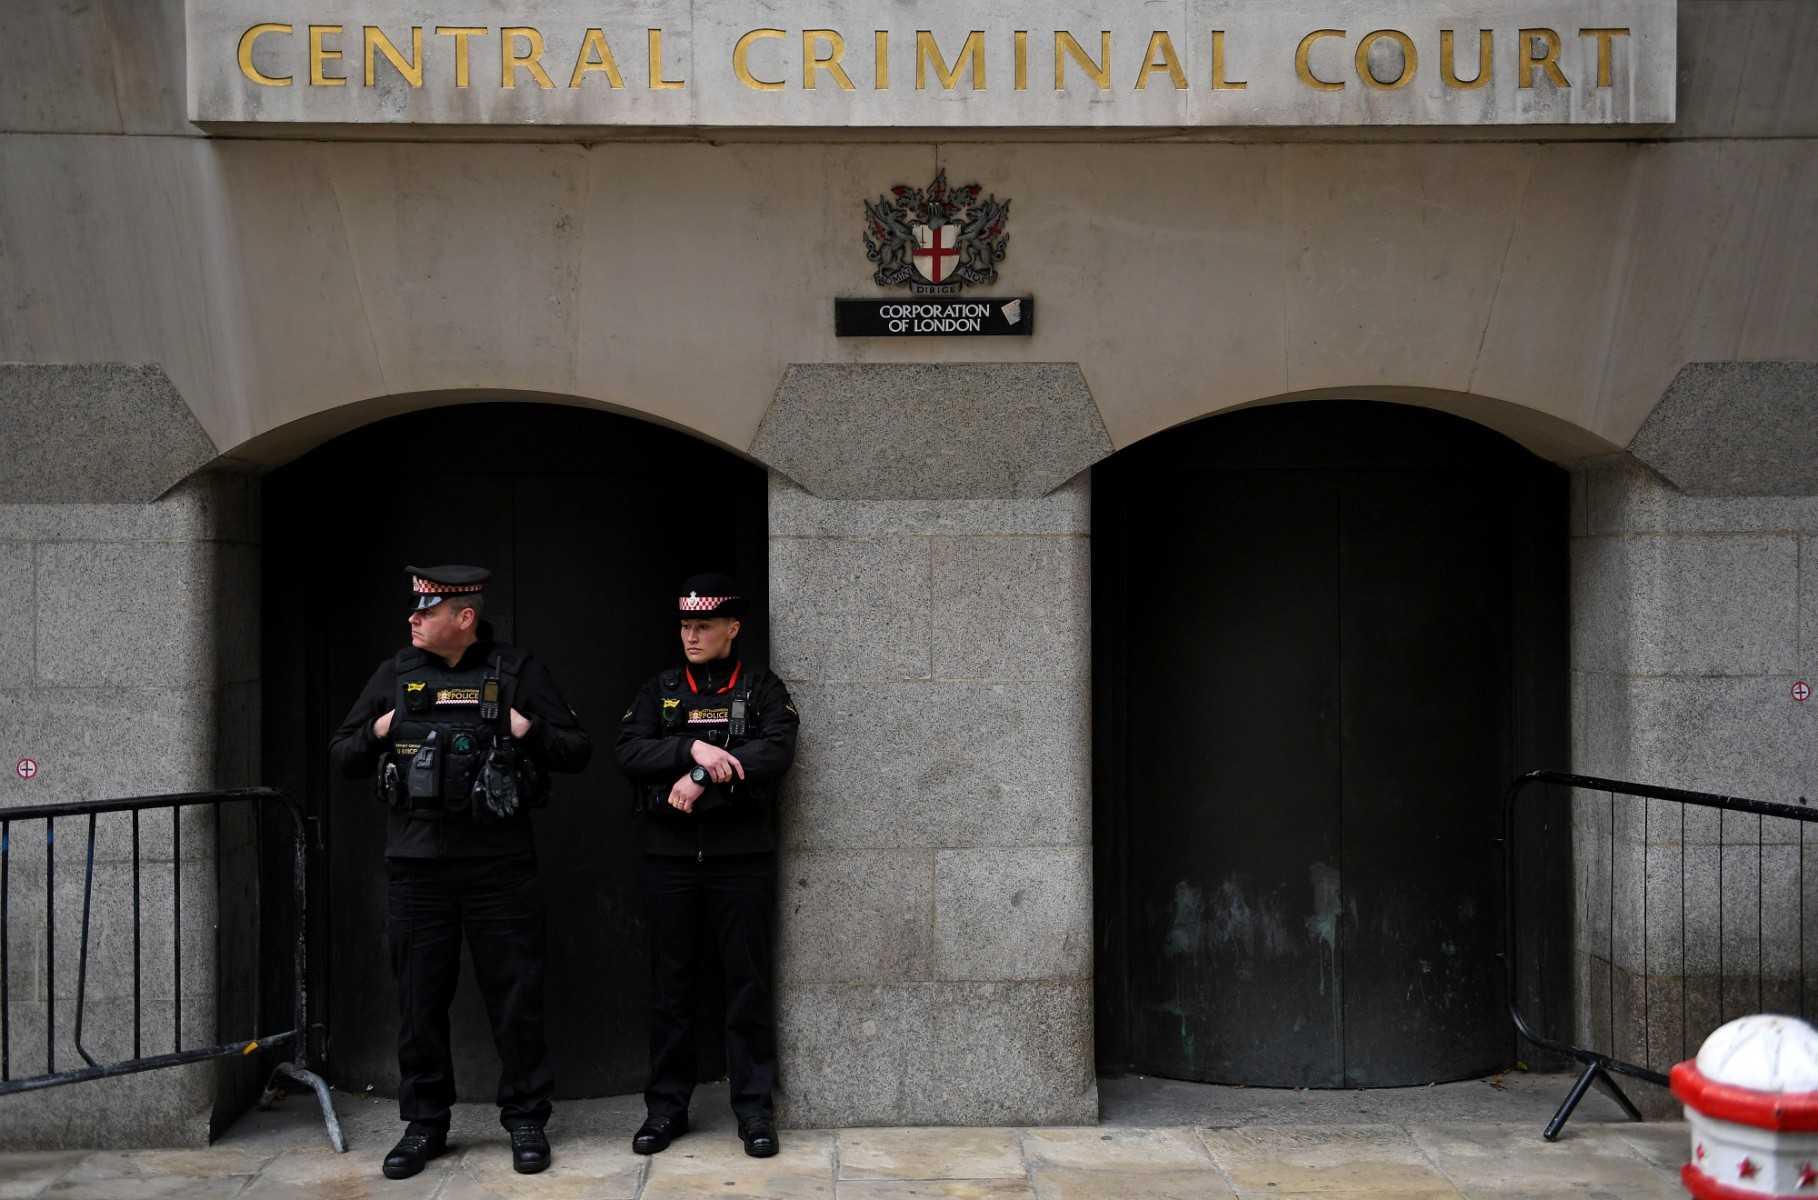 Police offices stand on duty outside the Old Bailey, England's Central Criminal Court, in this Sept 30, 2021 photo. Photo: AFP 